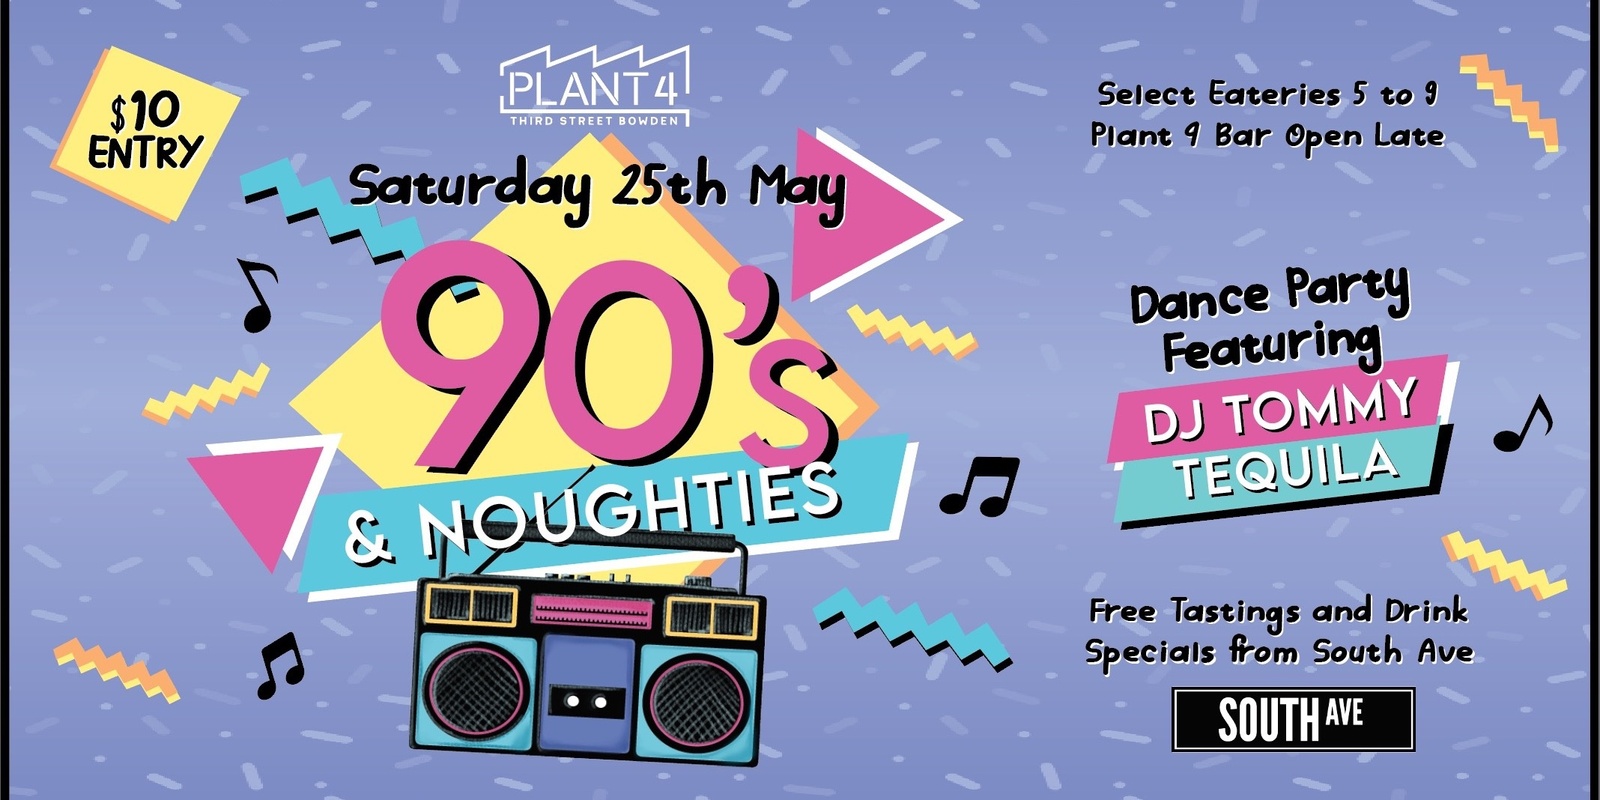 Banner image for 90s & Noughties at Plant 4